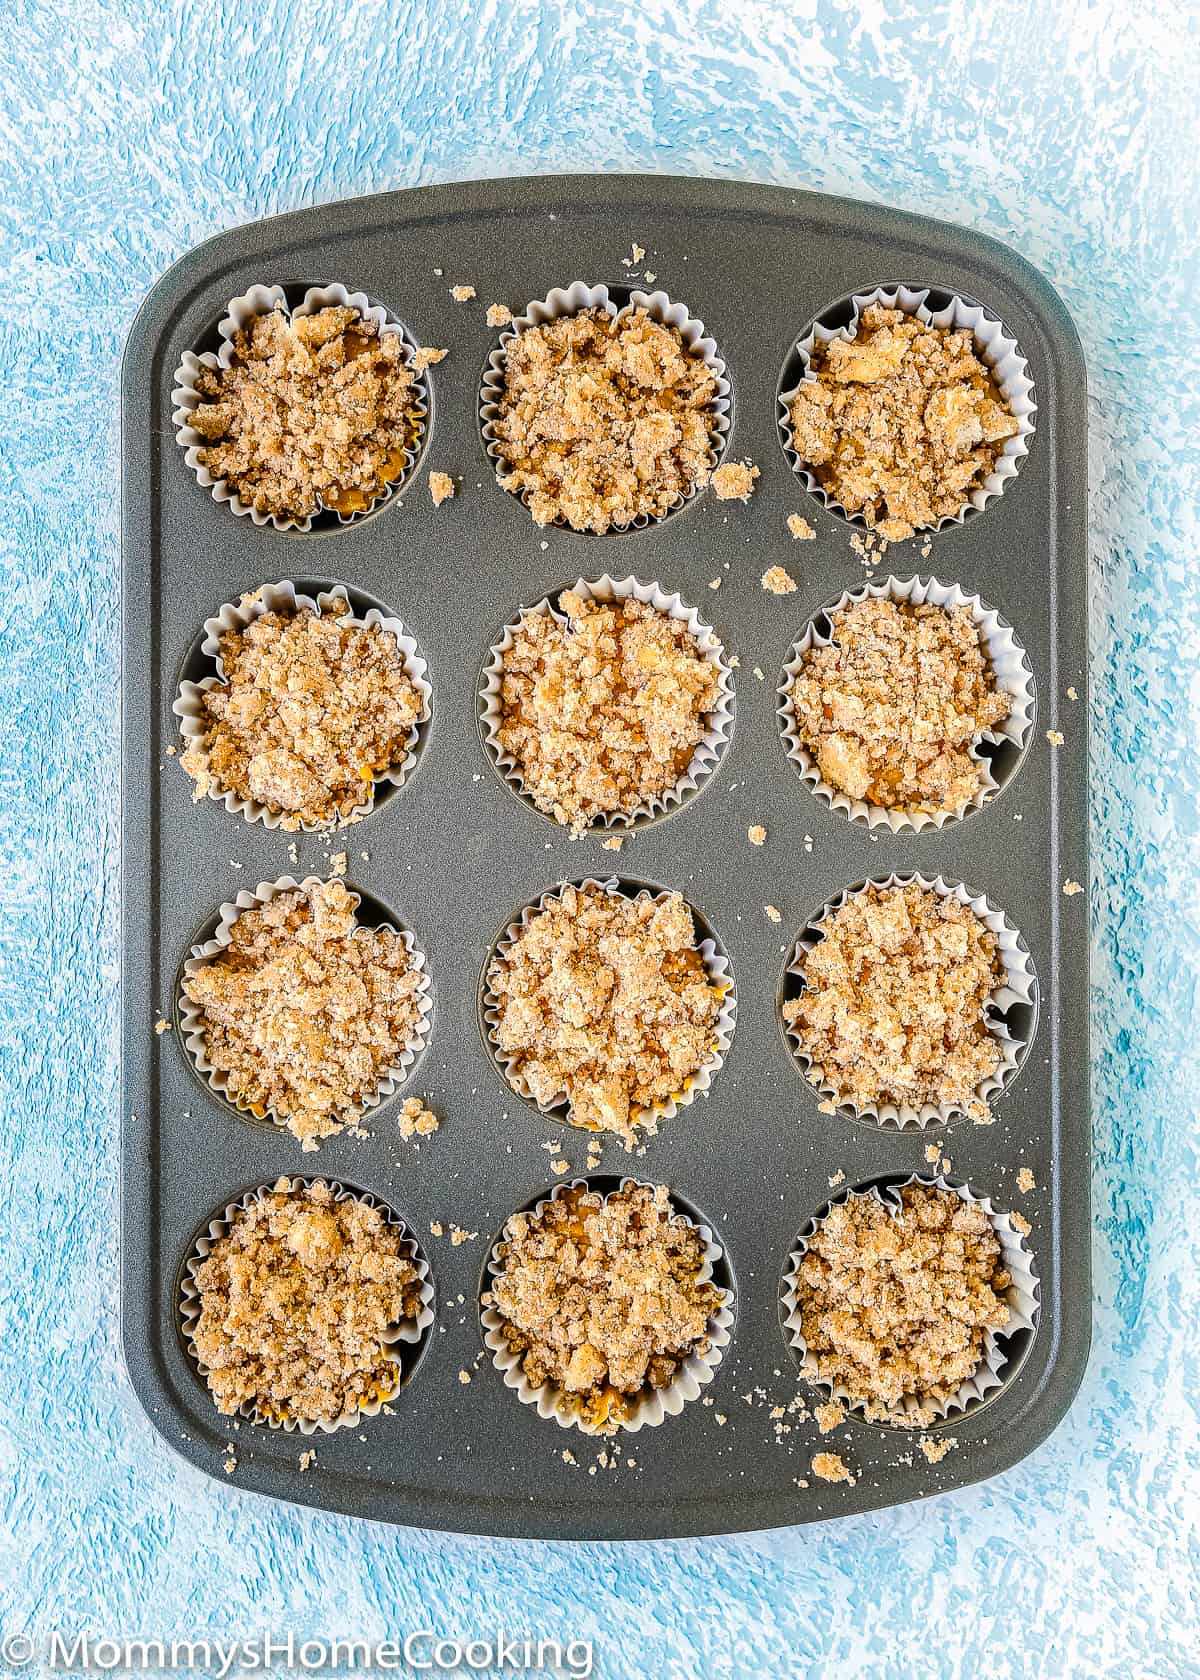 Unbaked Eggless Pumpkin Crumb Muffins in a baking muffin pan.